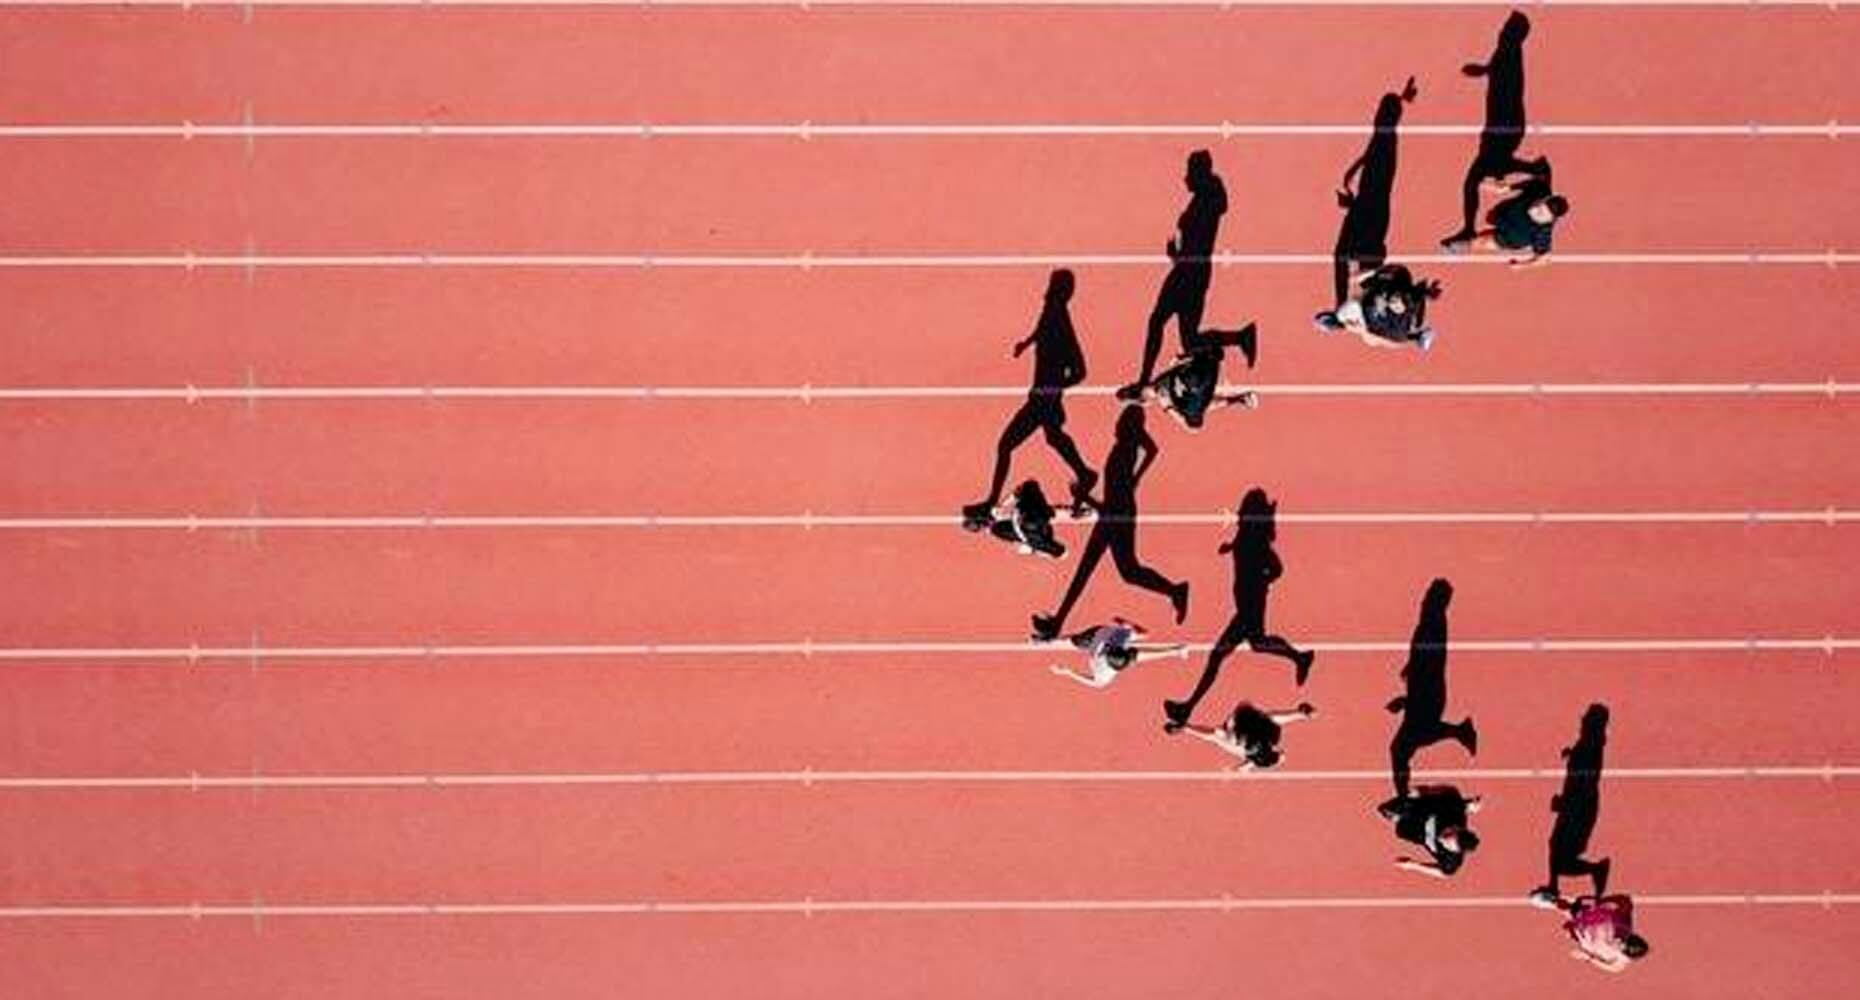 Silhouettes of runners casting shadows on a track